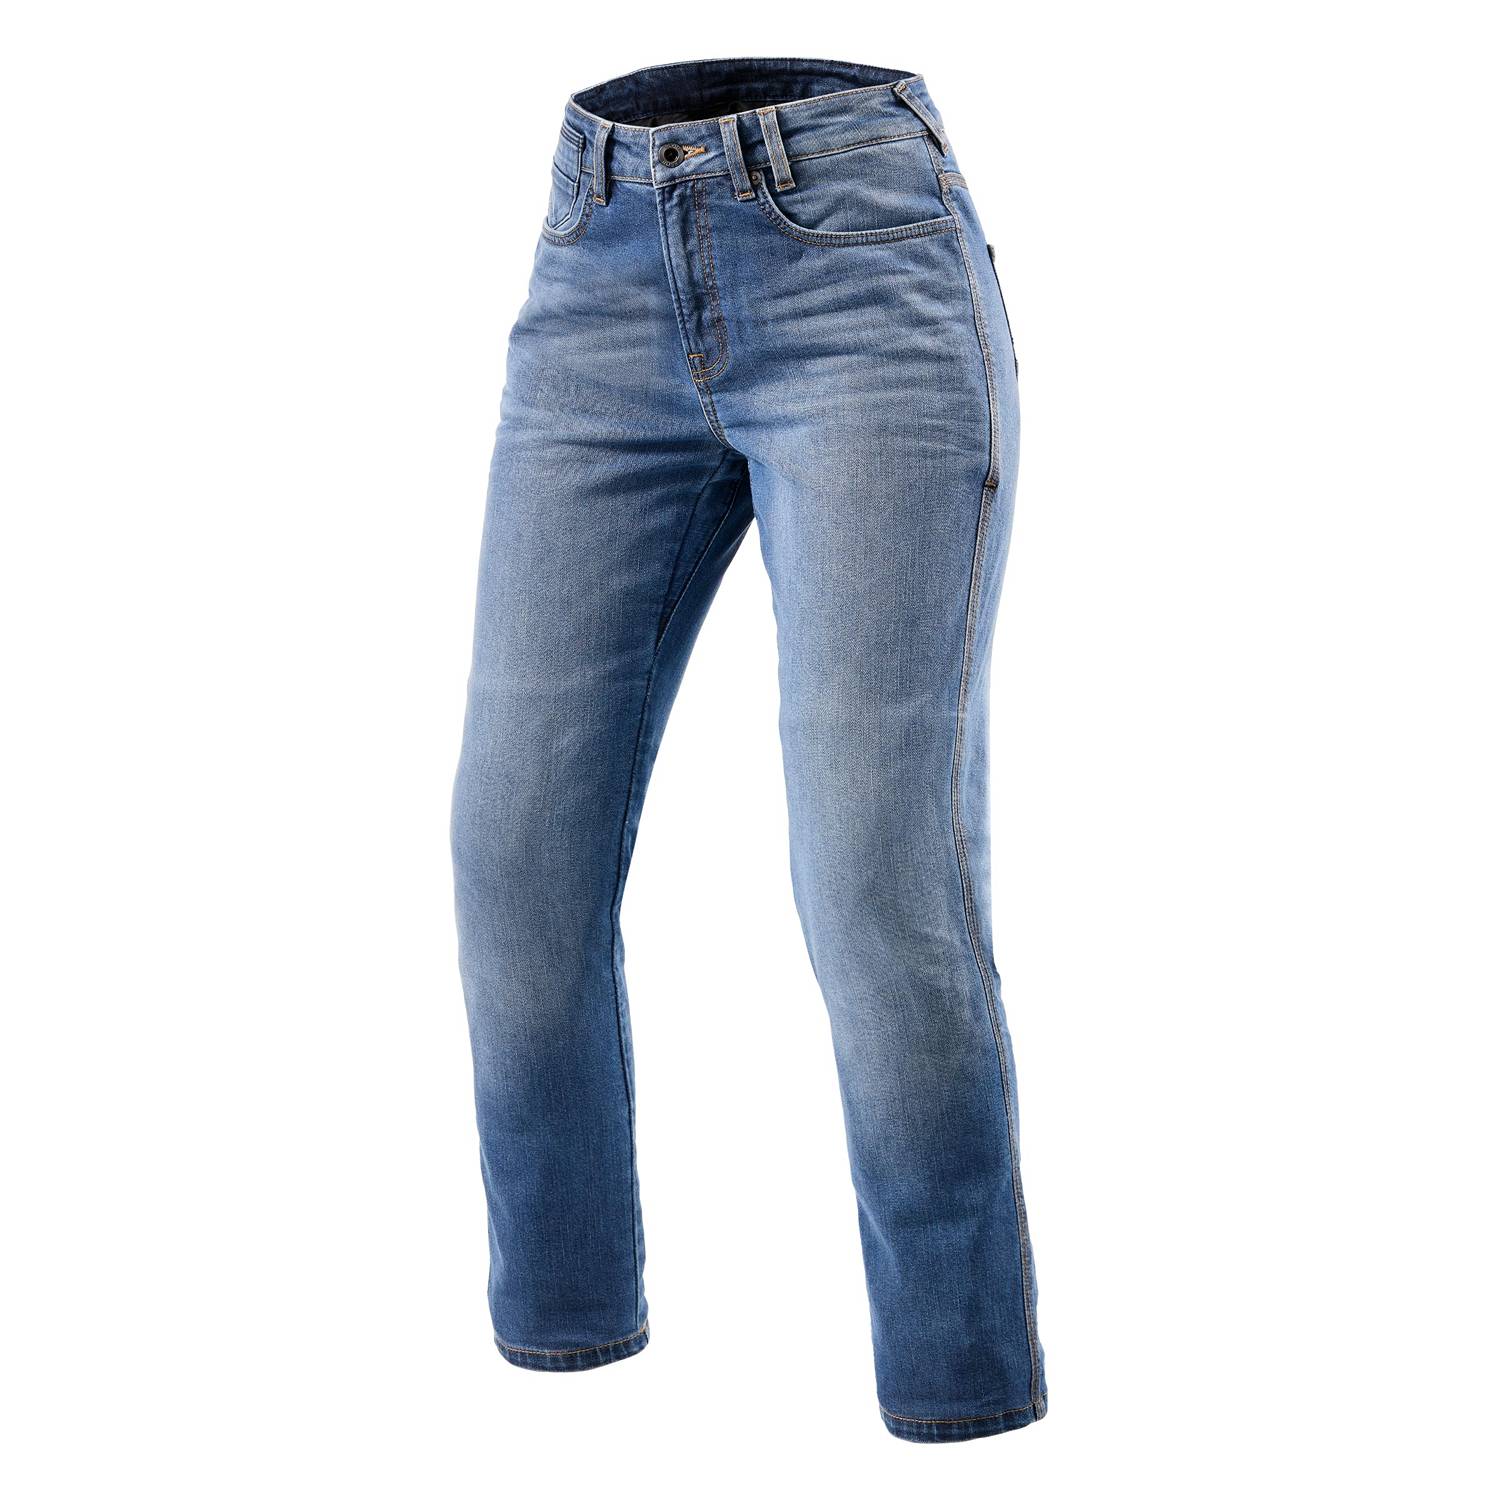 Image of REV'IT! Jeans Victoria 2 Ladies SF Classic Blue Used Motorcycle Jeans Größe L32/W24